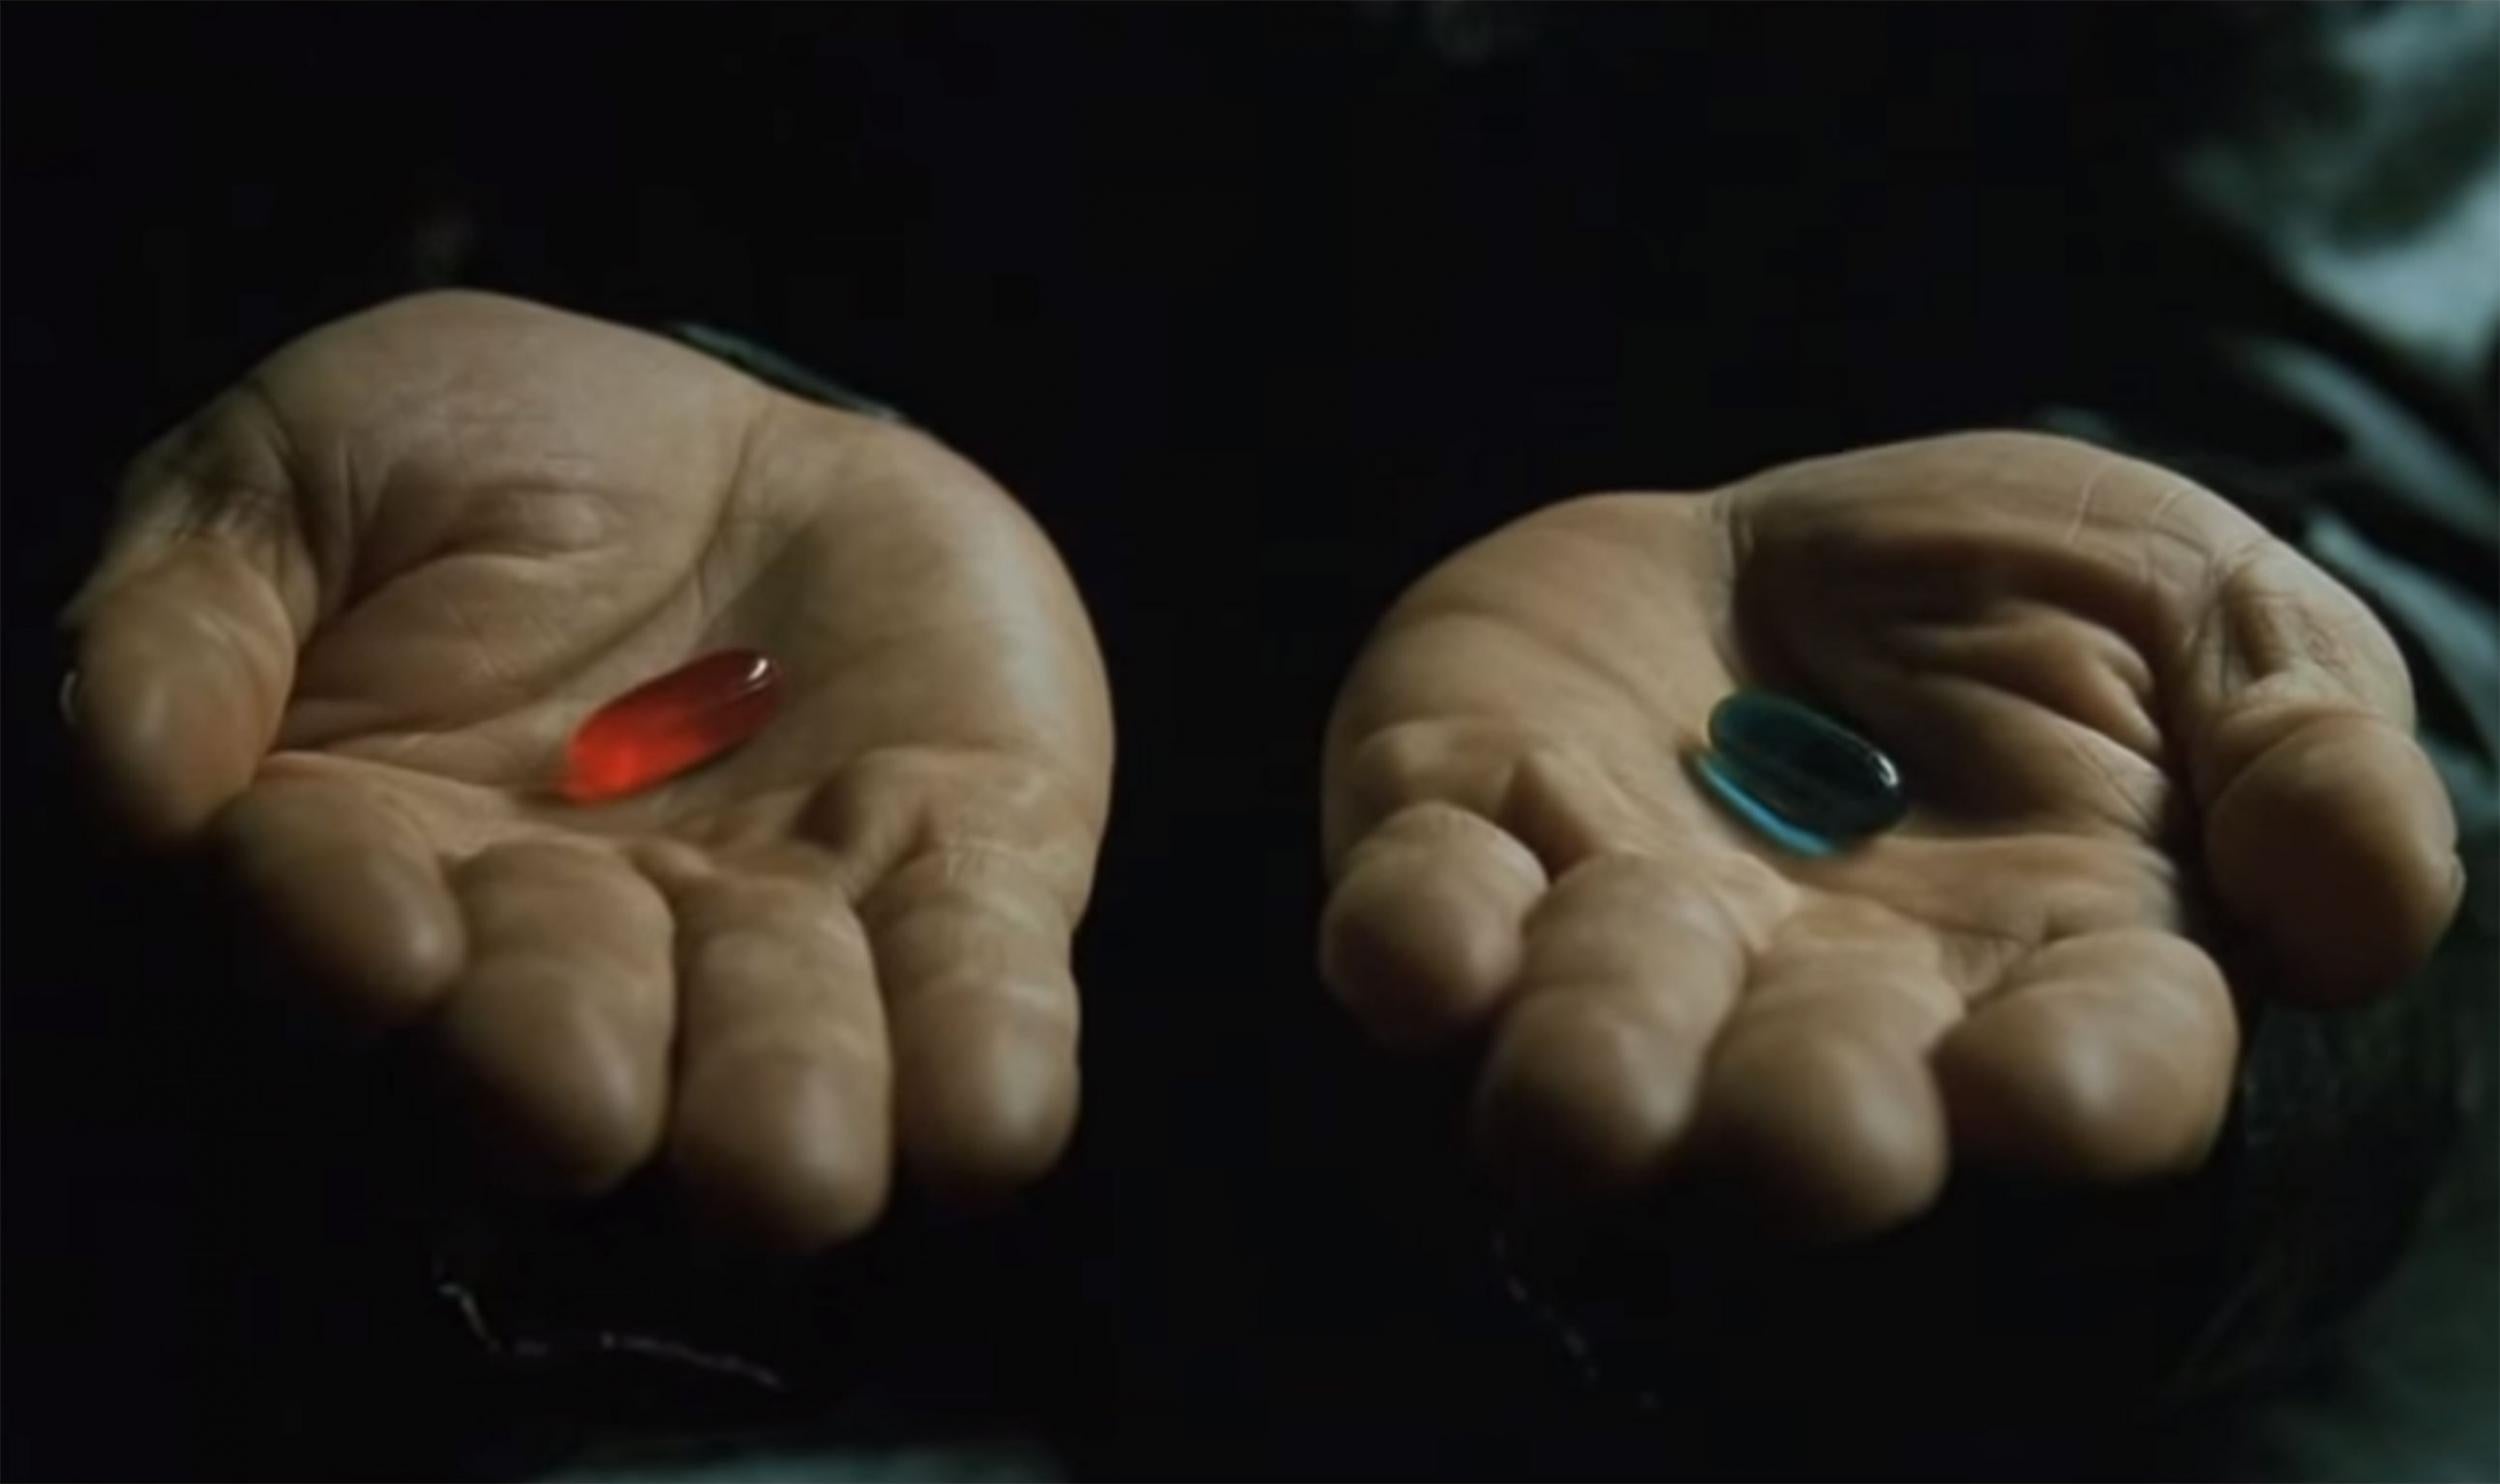 red and blue pill in the matrix